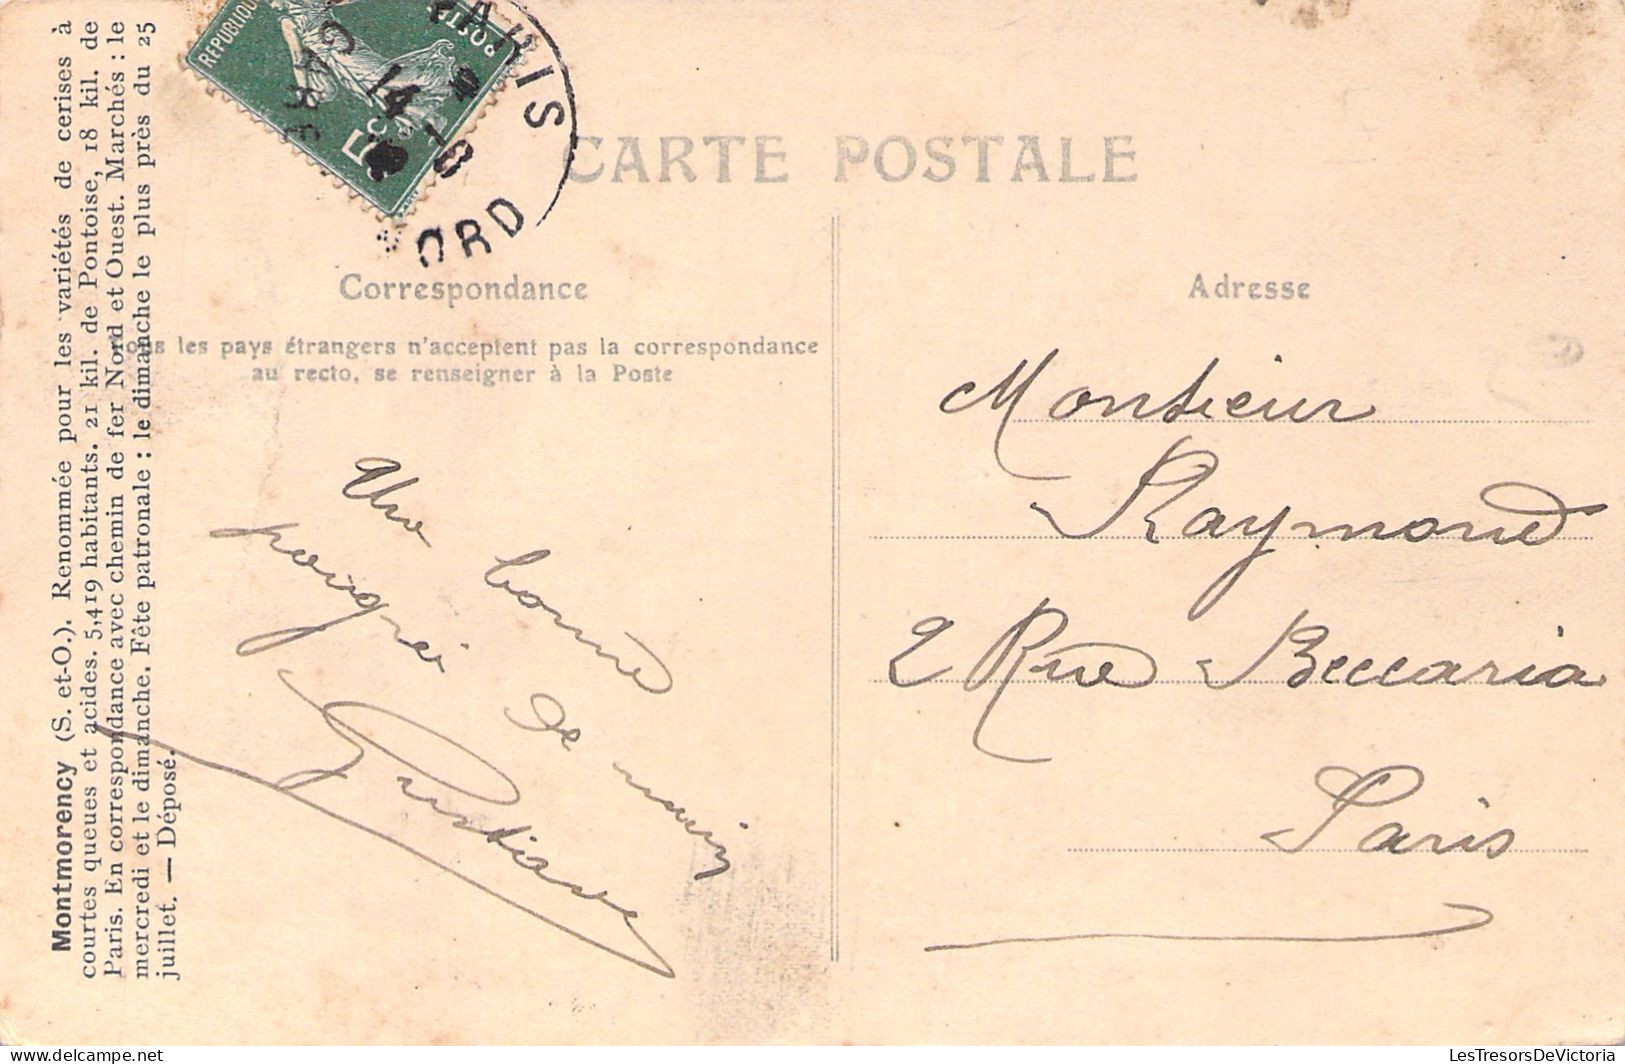 FRANCE - Montmorency - Une Mauvaise Blague - Ane - Carte Postale Ancienne - Montmorency